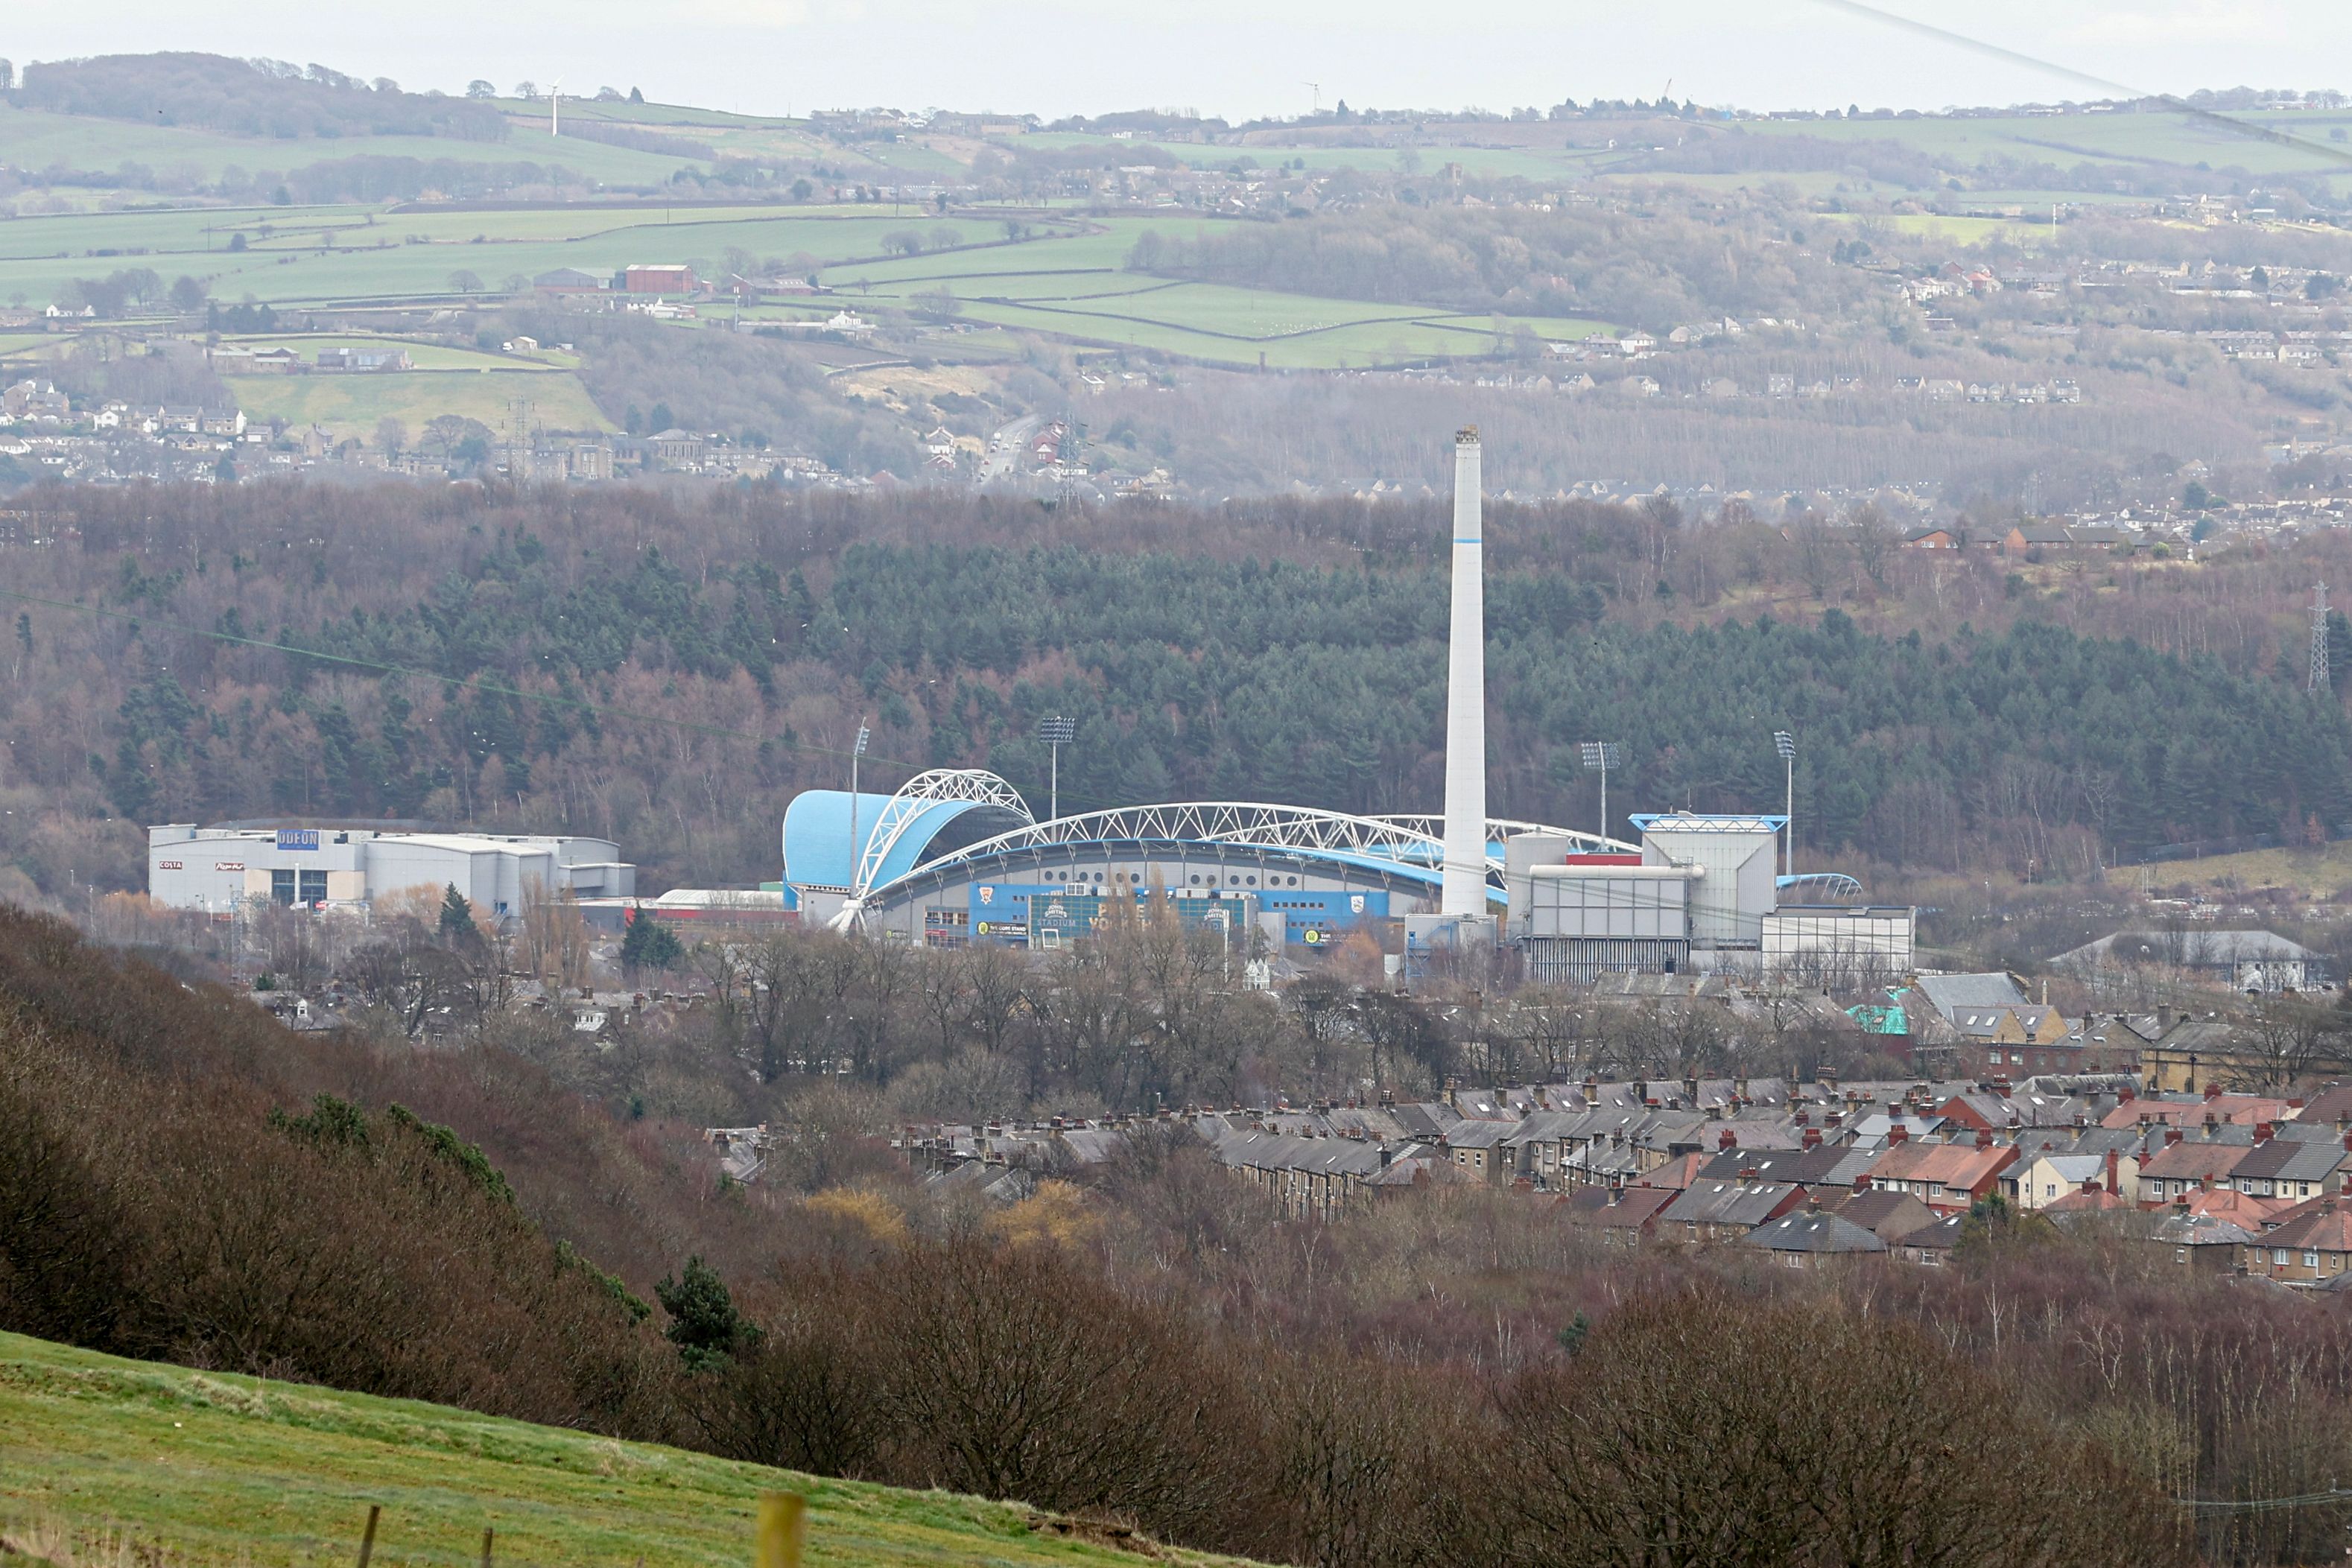 a general view of the John Smith's Stadium from a distance with the Yorkshire hills in the background 